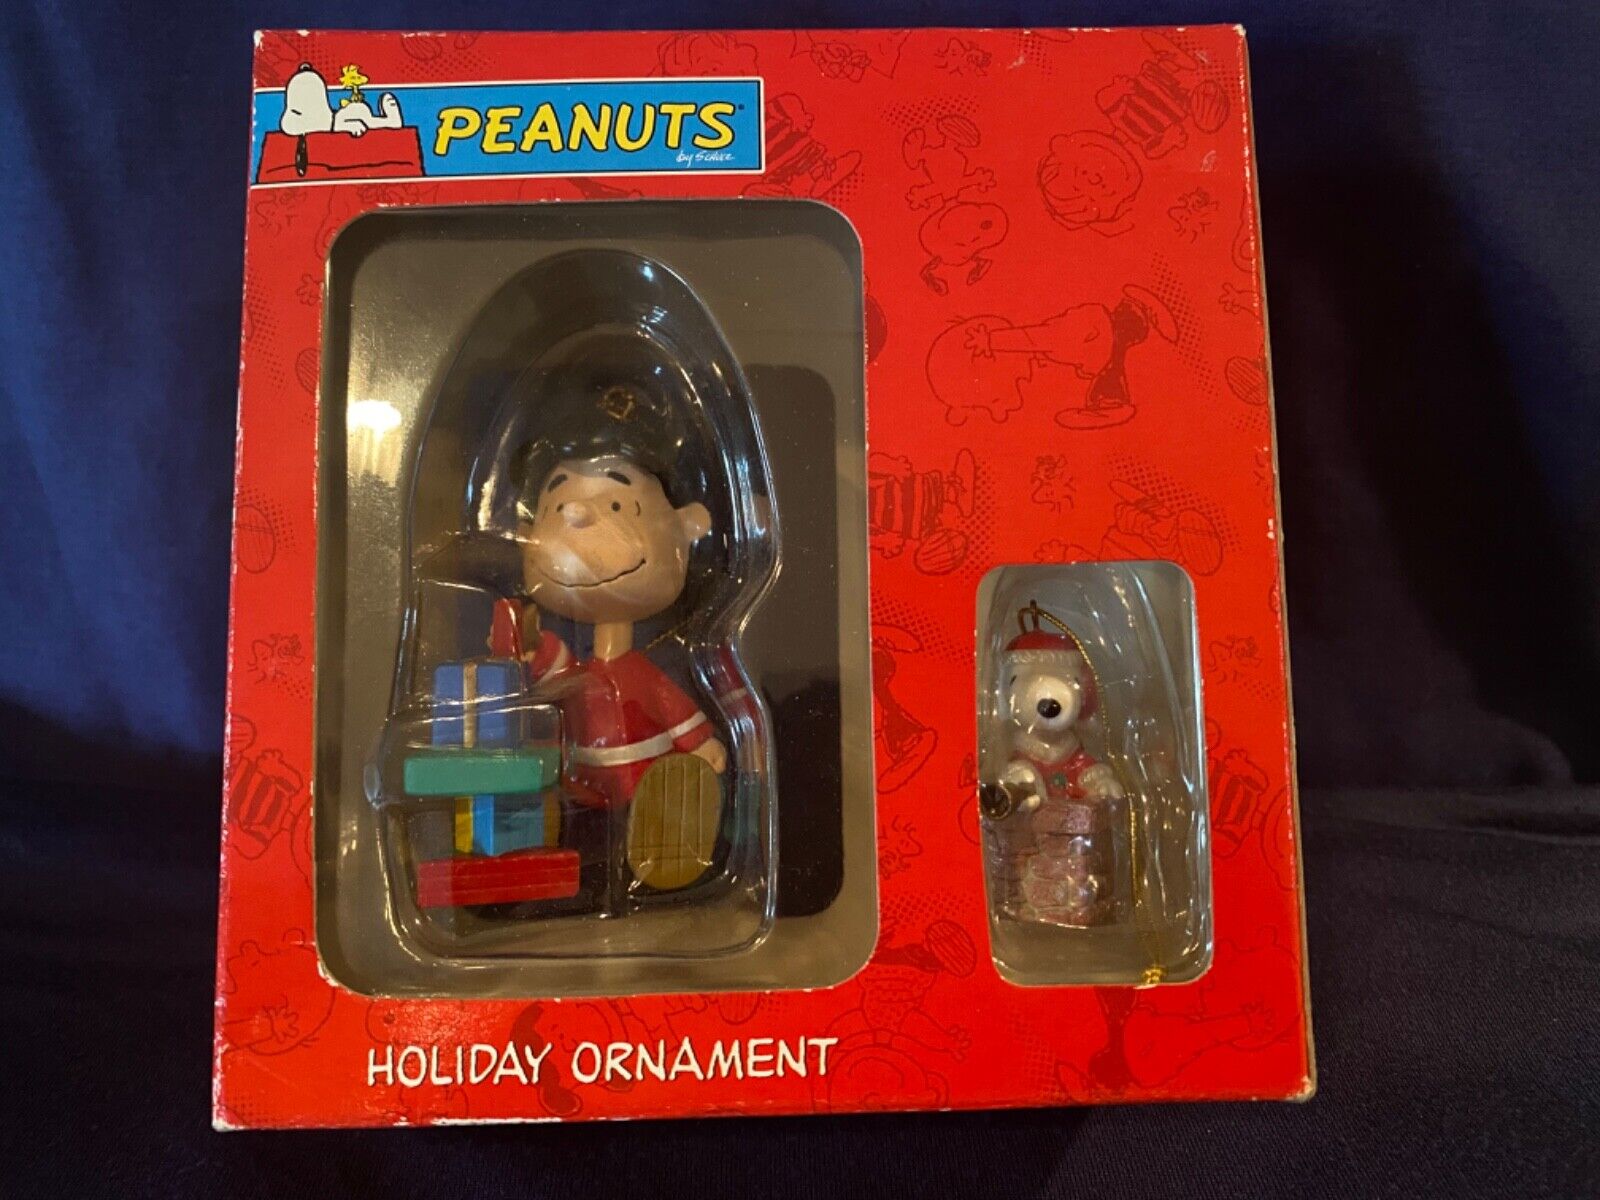 Snoopy and Lucy Peanuts Holiday Ornament New In Box